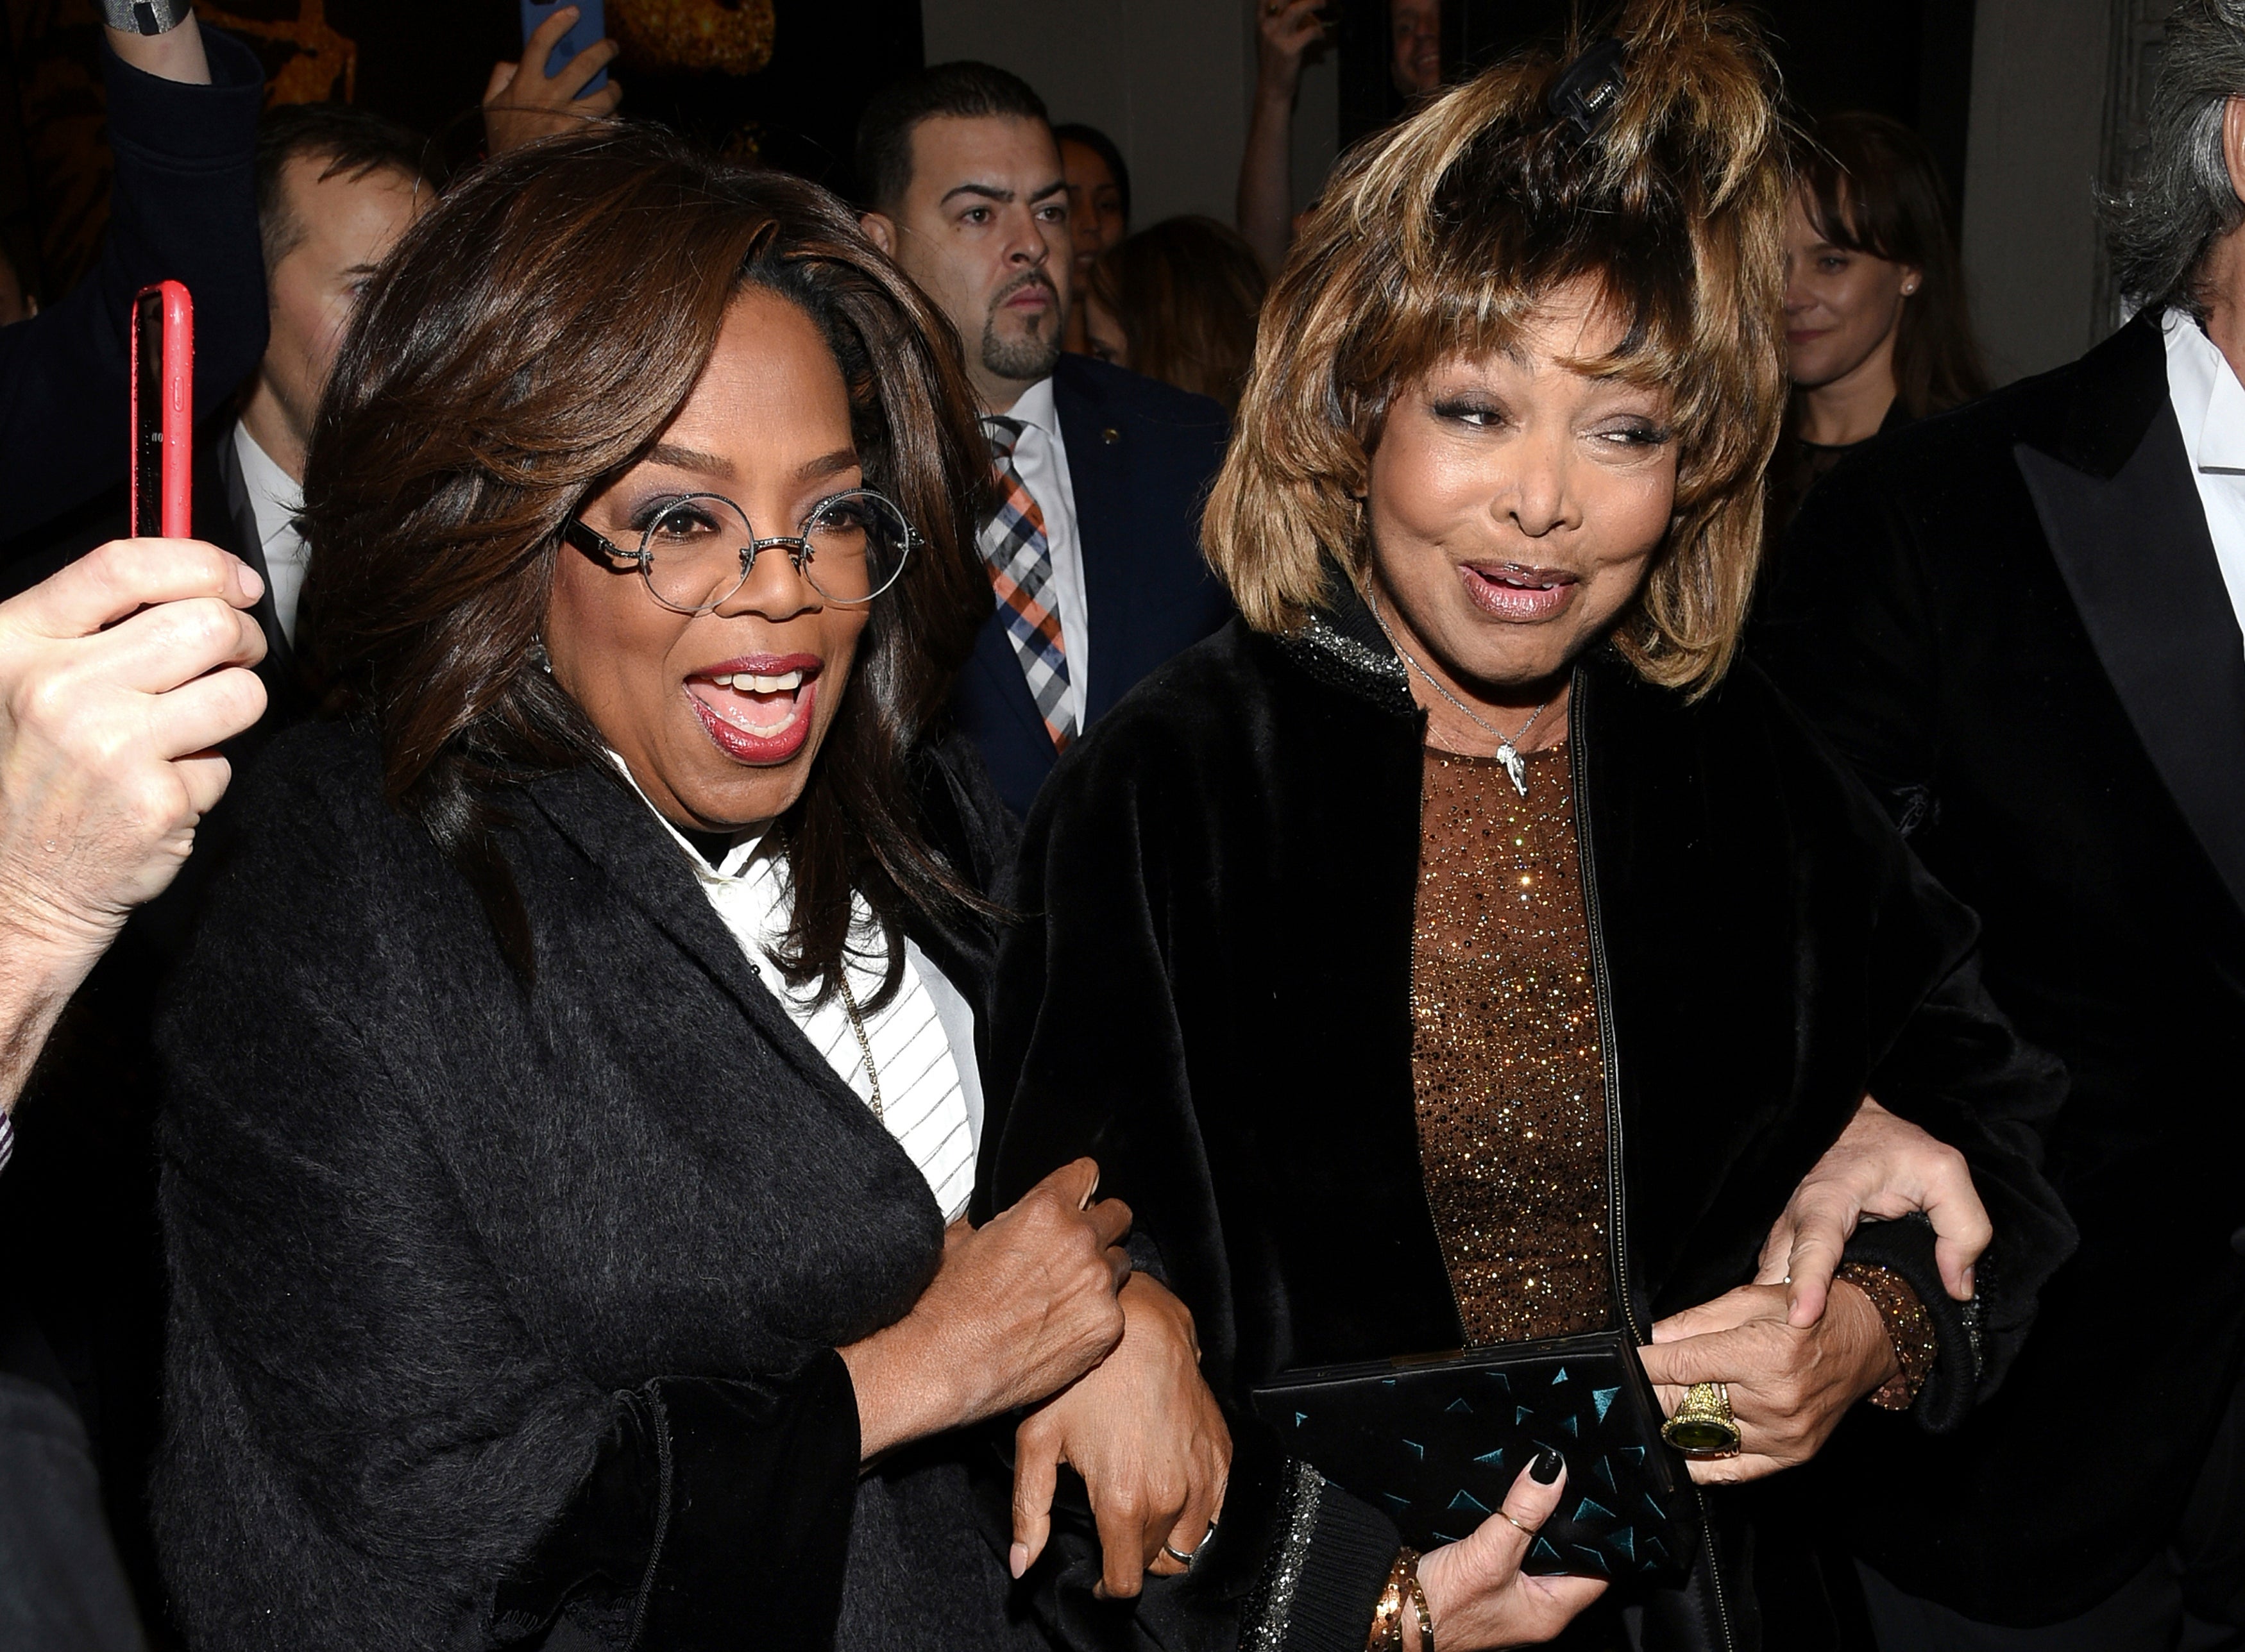 Tina Turner, right, arrives with Oprah Winfrey for the opening night of ‘Tina - The Tina Turner Musical’ in 2019